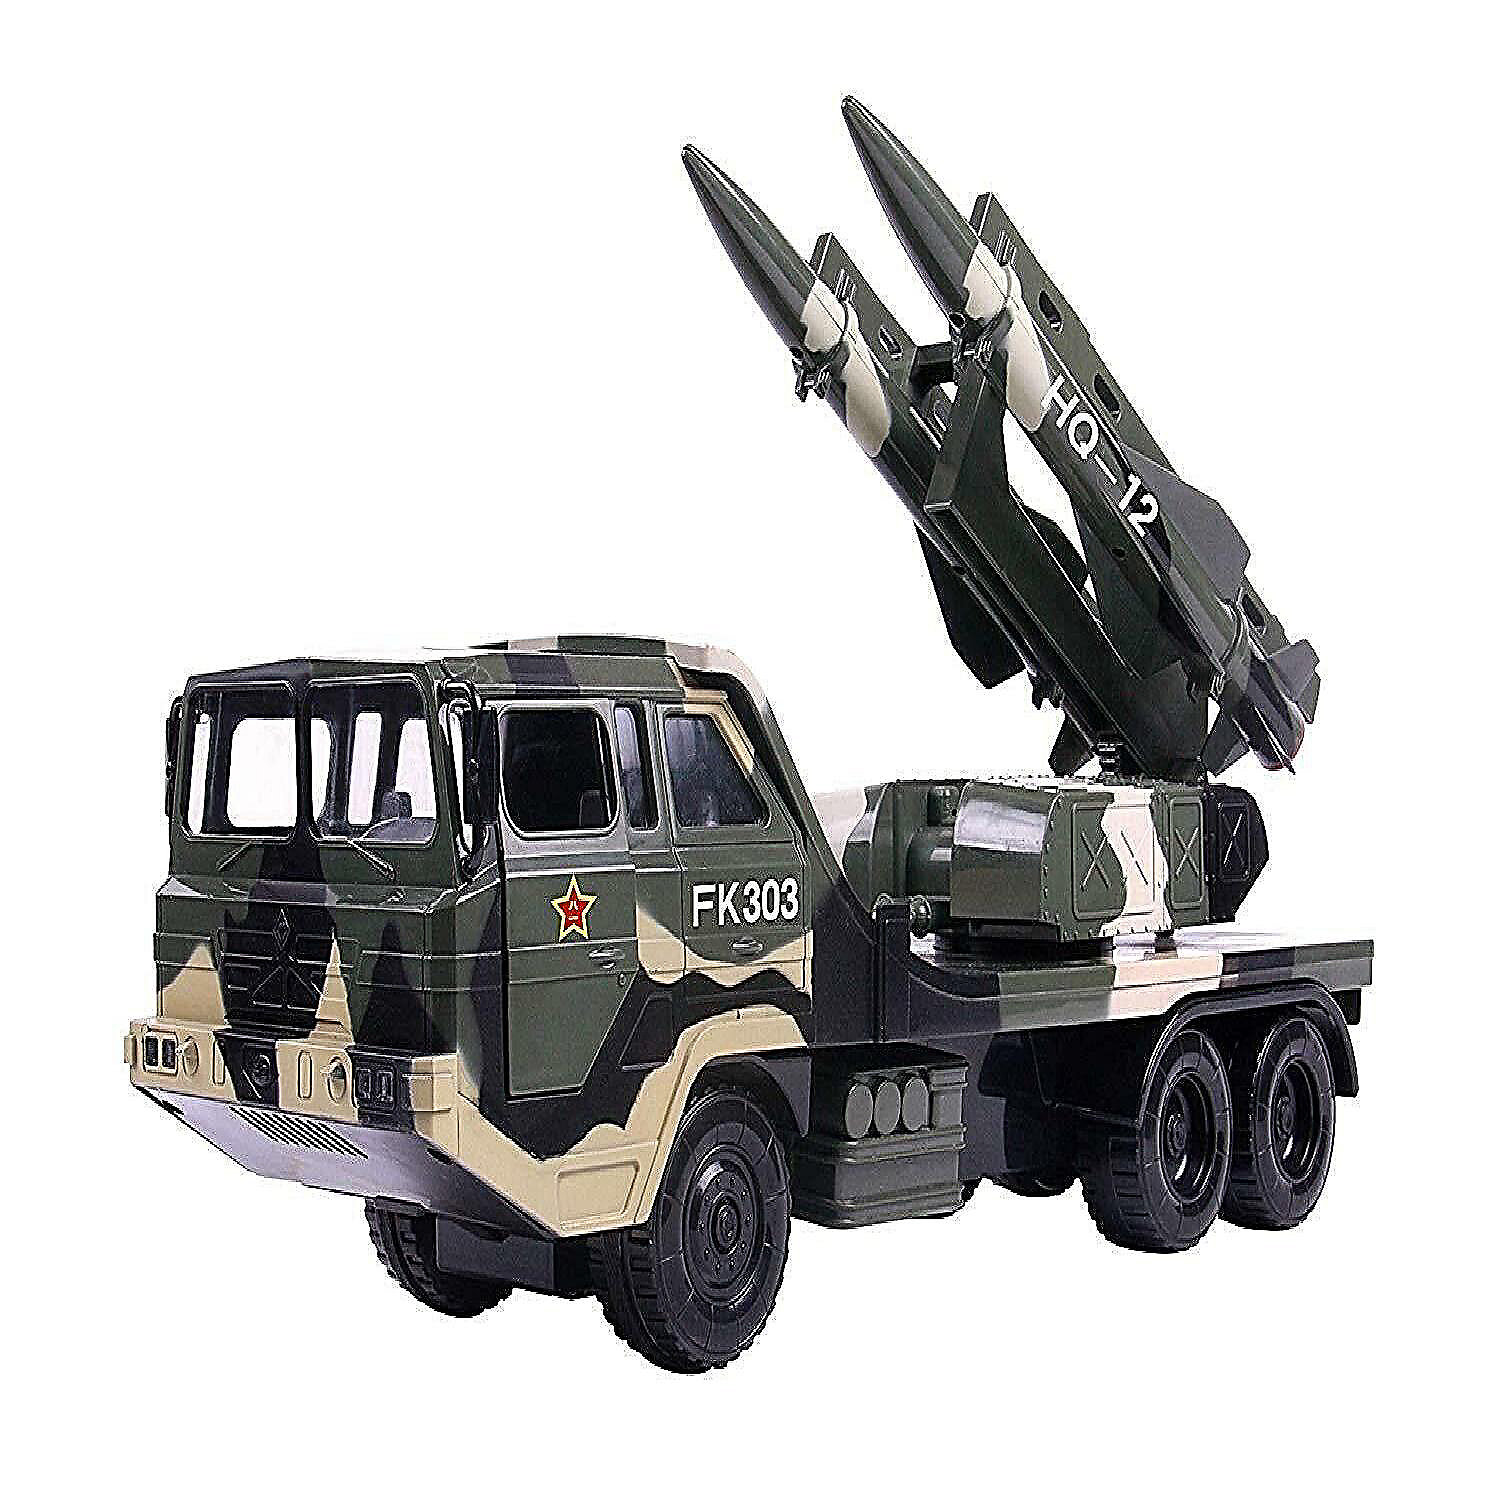 Big Daddy Military Missile Transport Army Truck Defence System 18 Long Range Missile Jungle Camouflage Toy Truck 